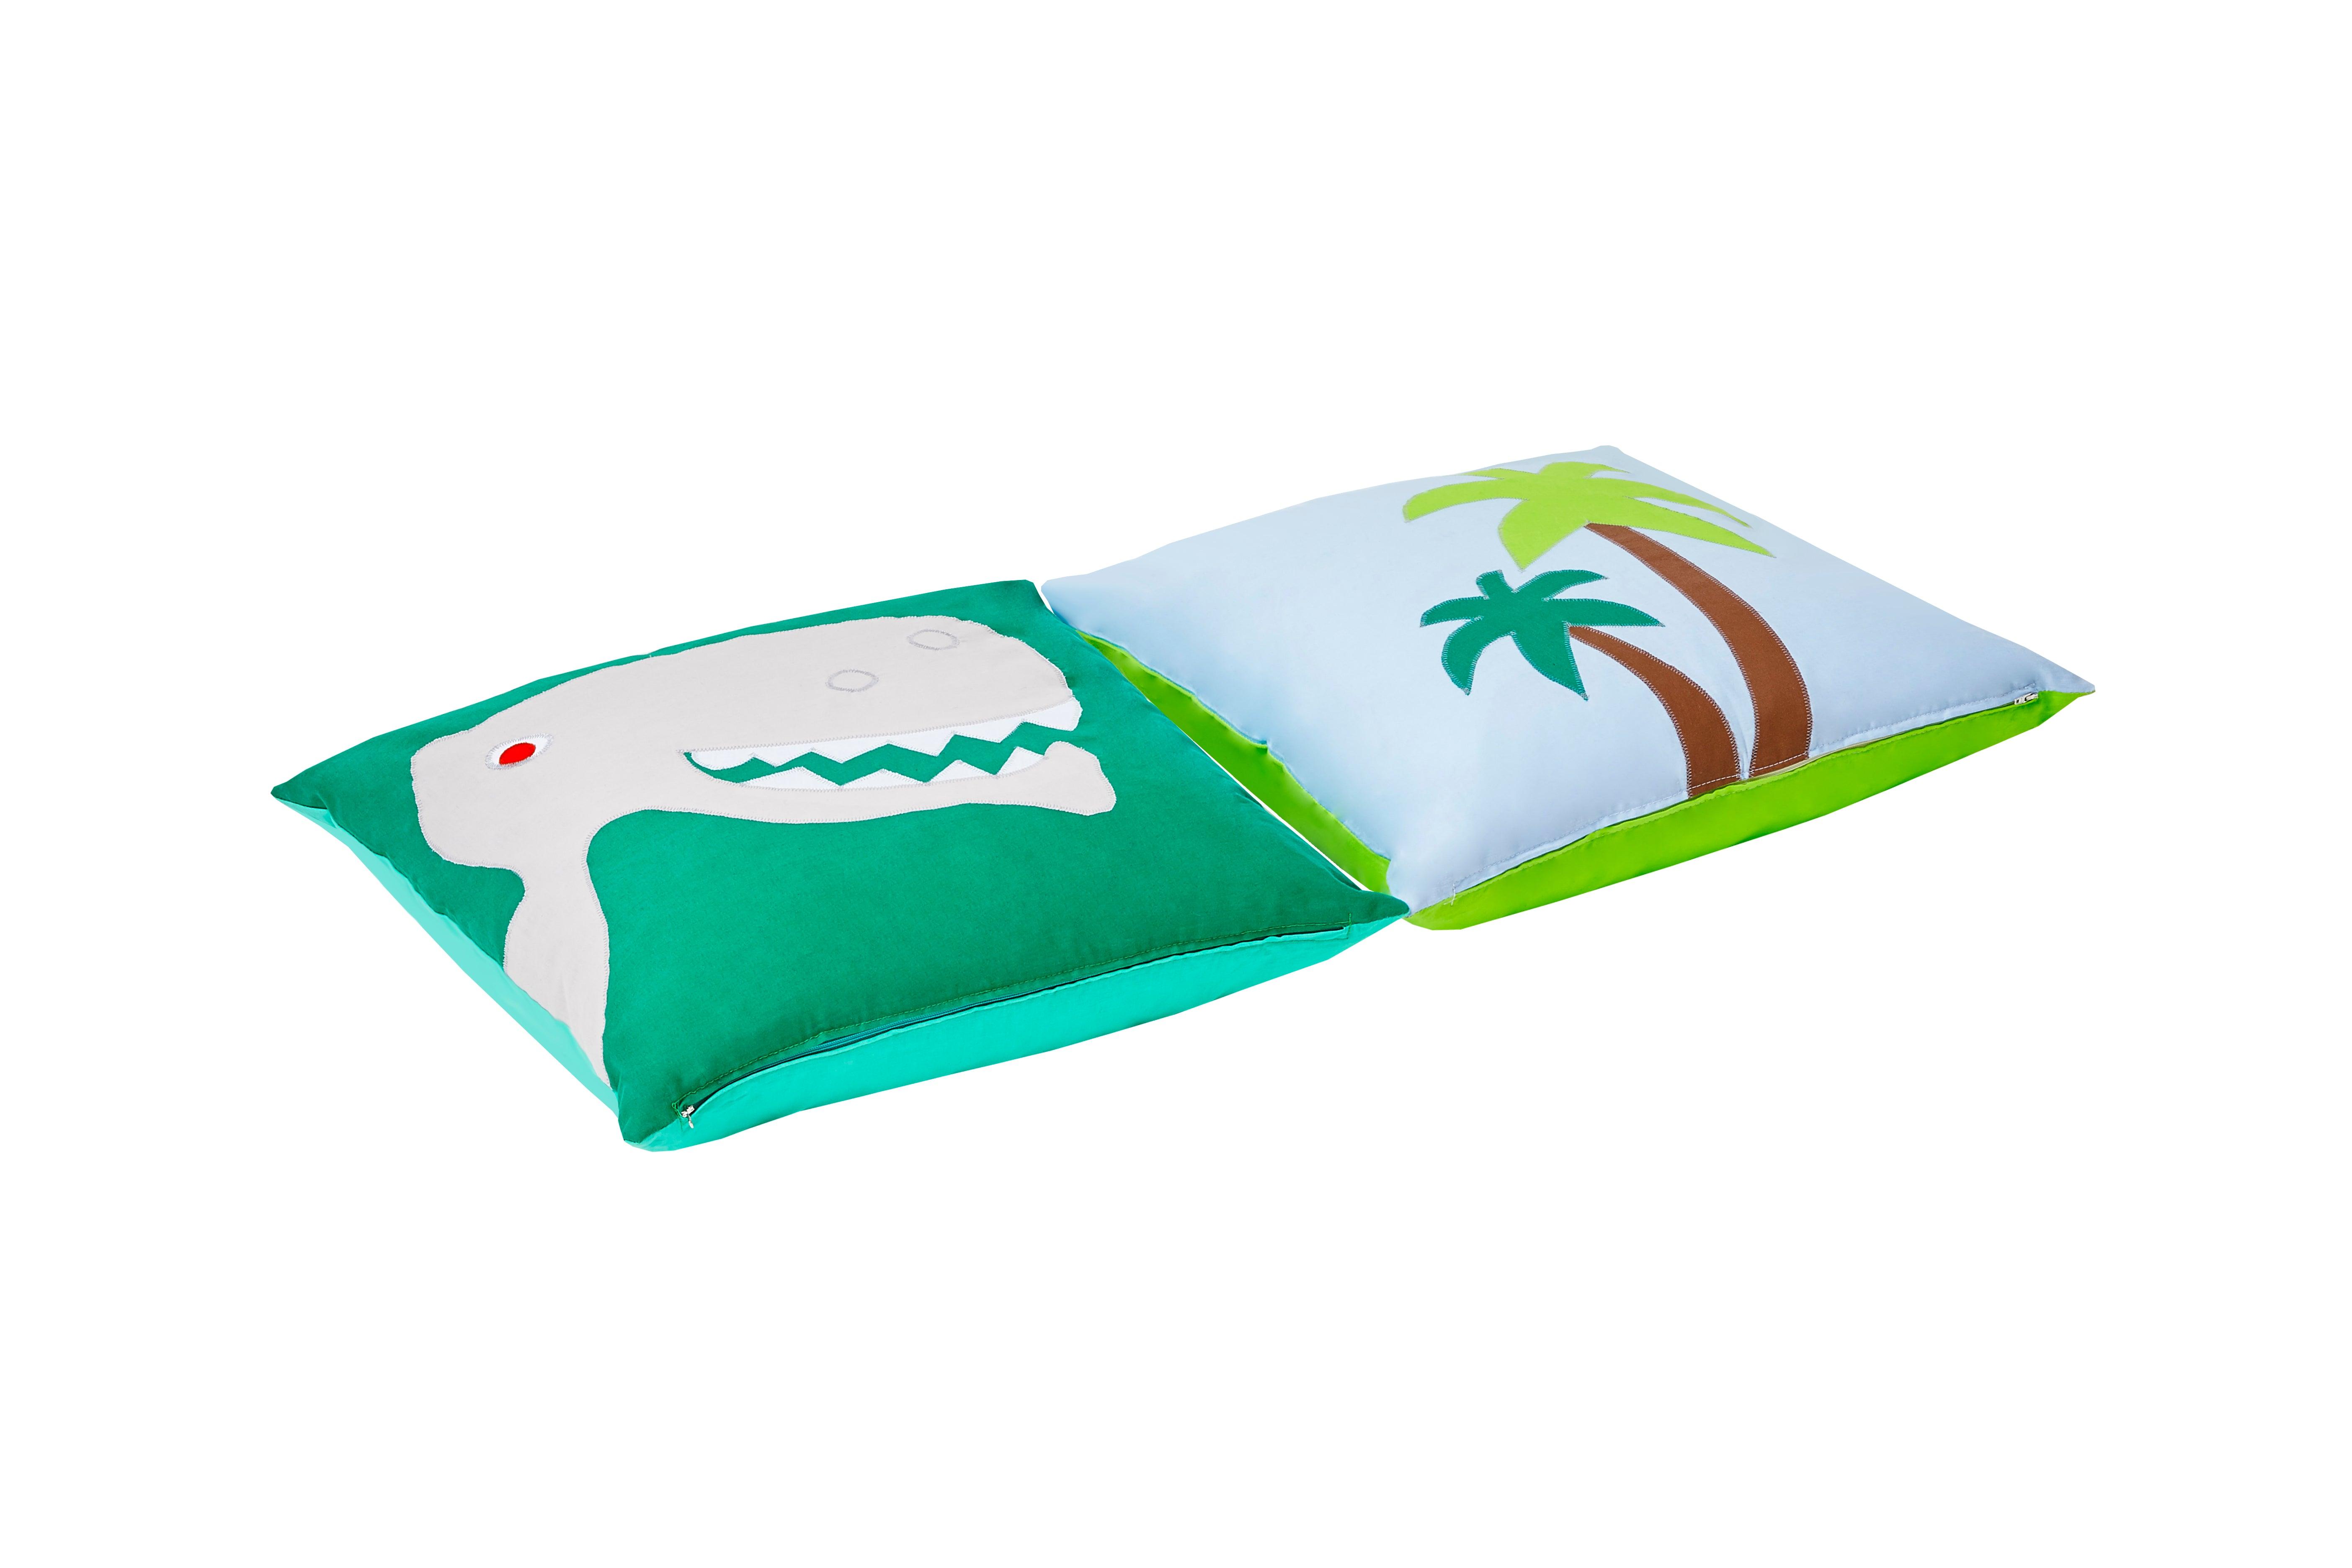 Dinosaur Theme Package for Hoppekids Half-high and Mid-high Bed